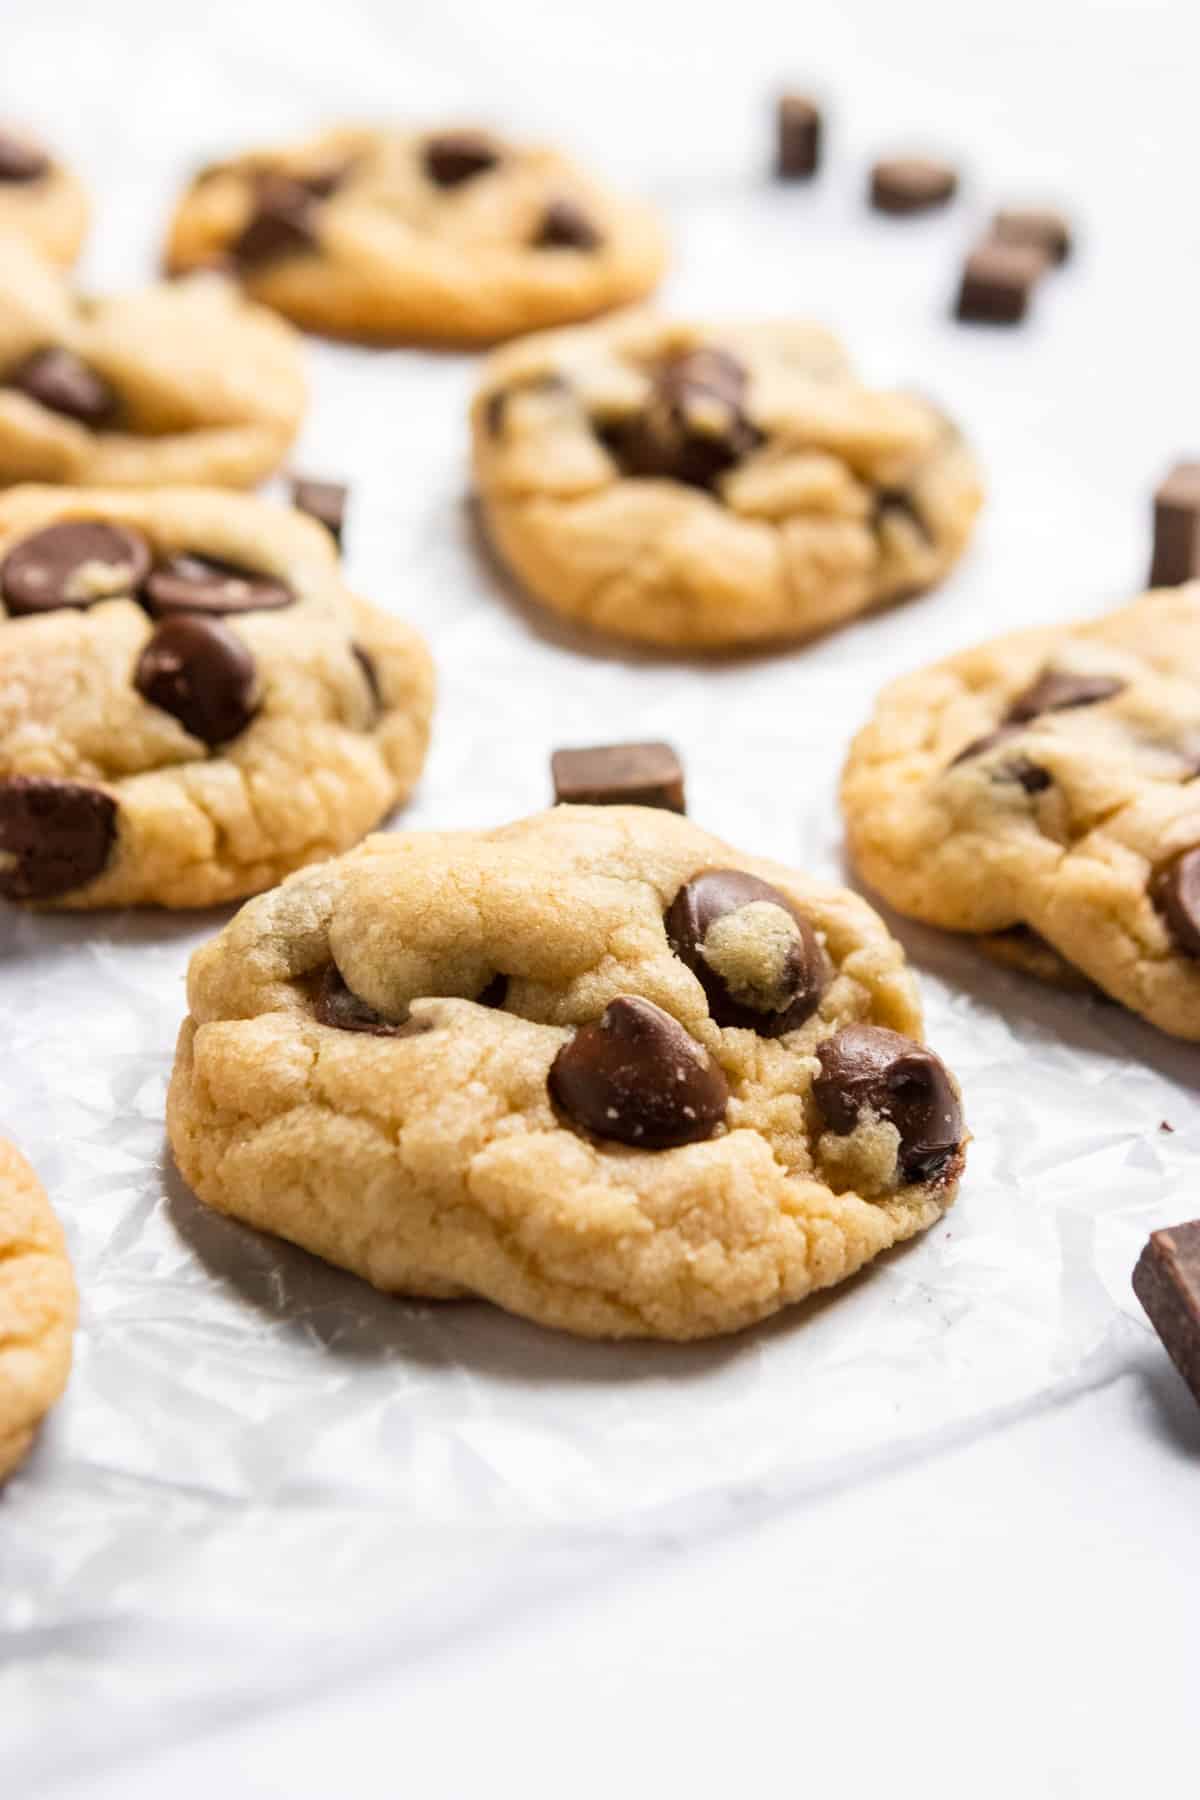 Chocolate chip cookies on parchment.